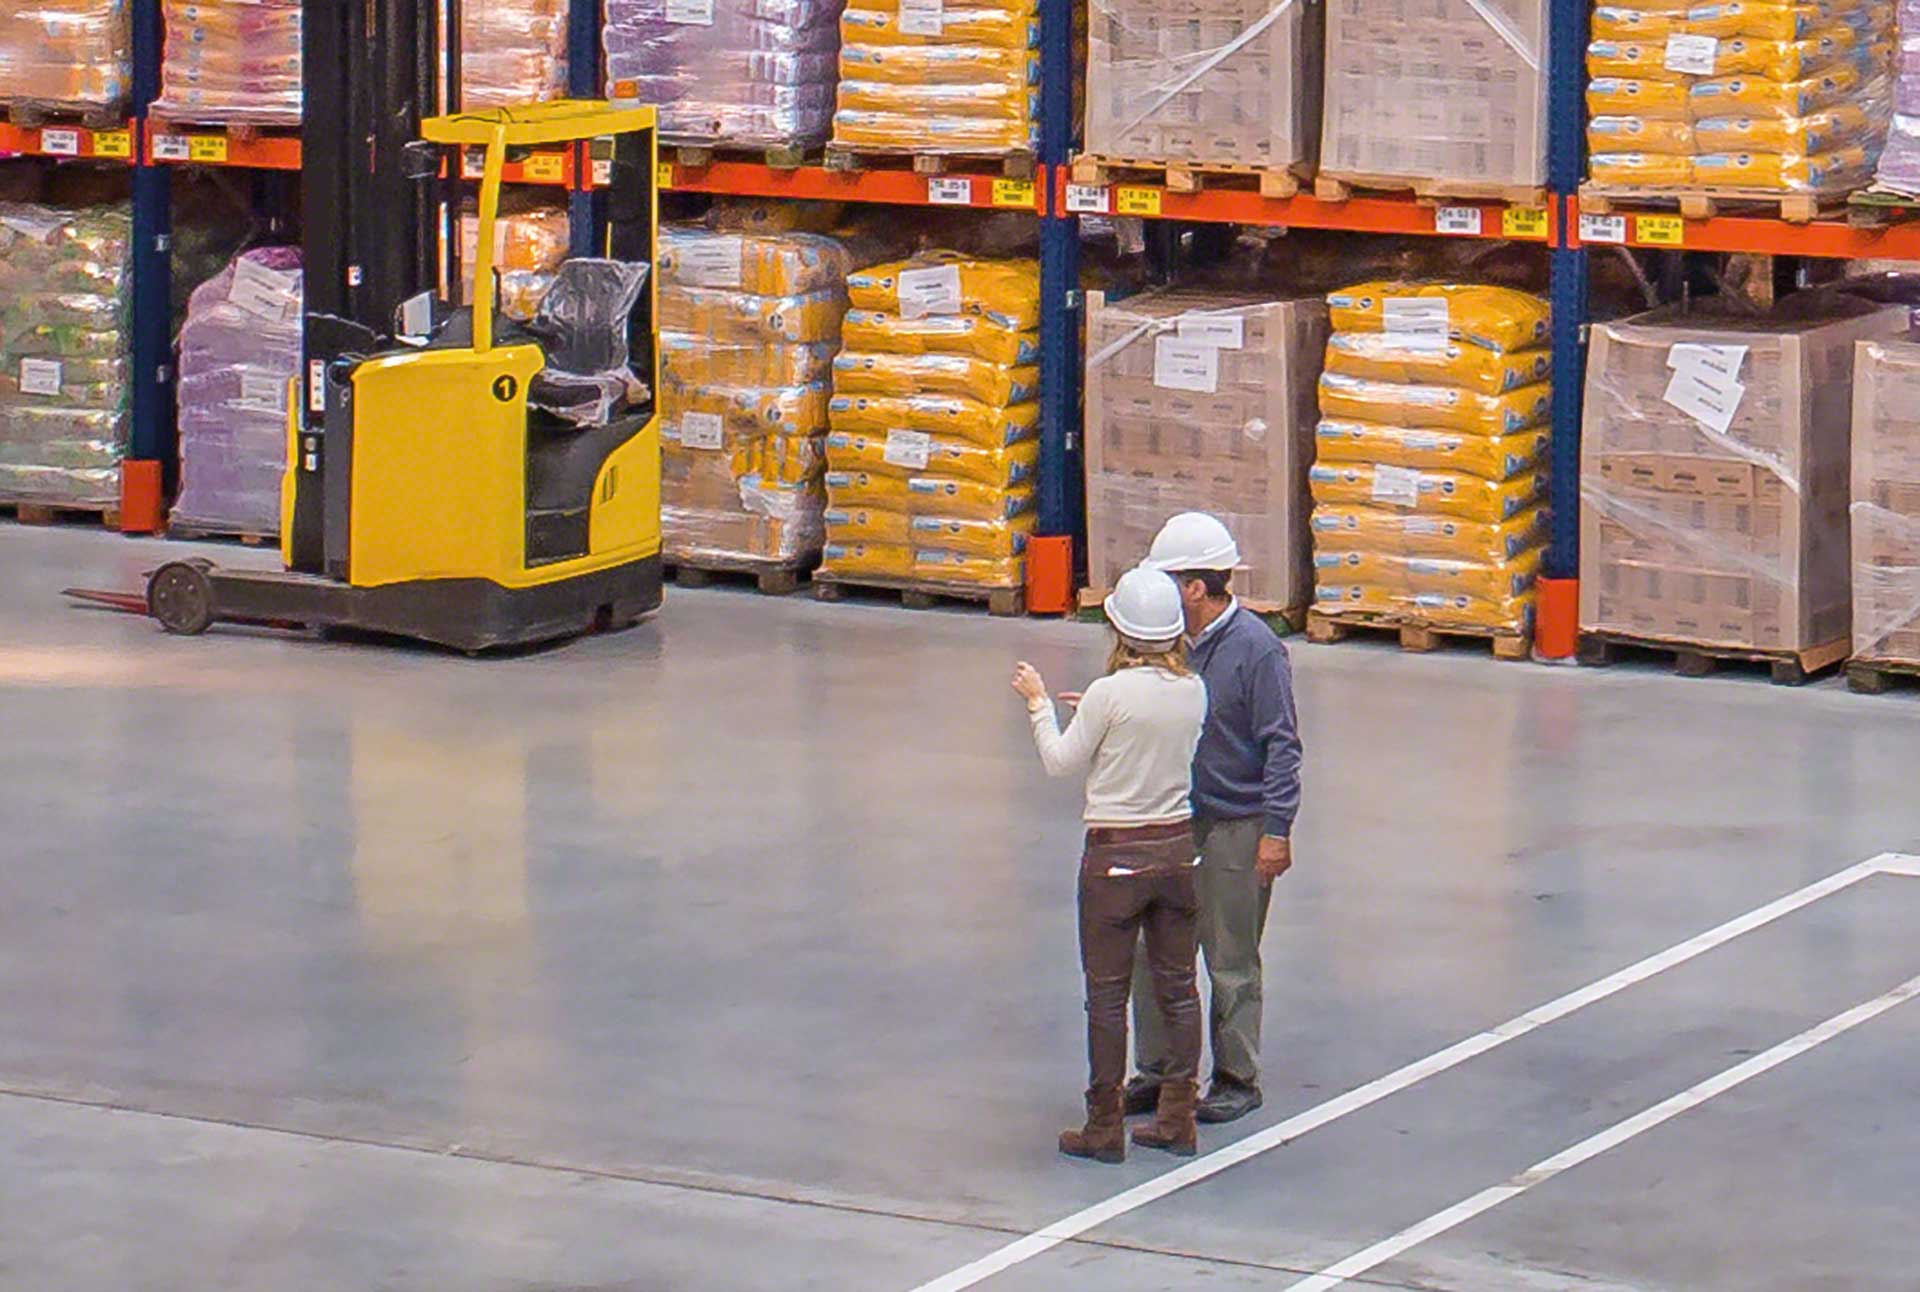 The logistics manager is responsible for supervising and managing all processes that take place in a warehouse